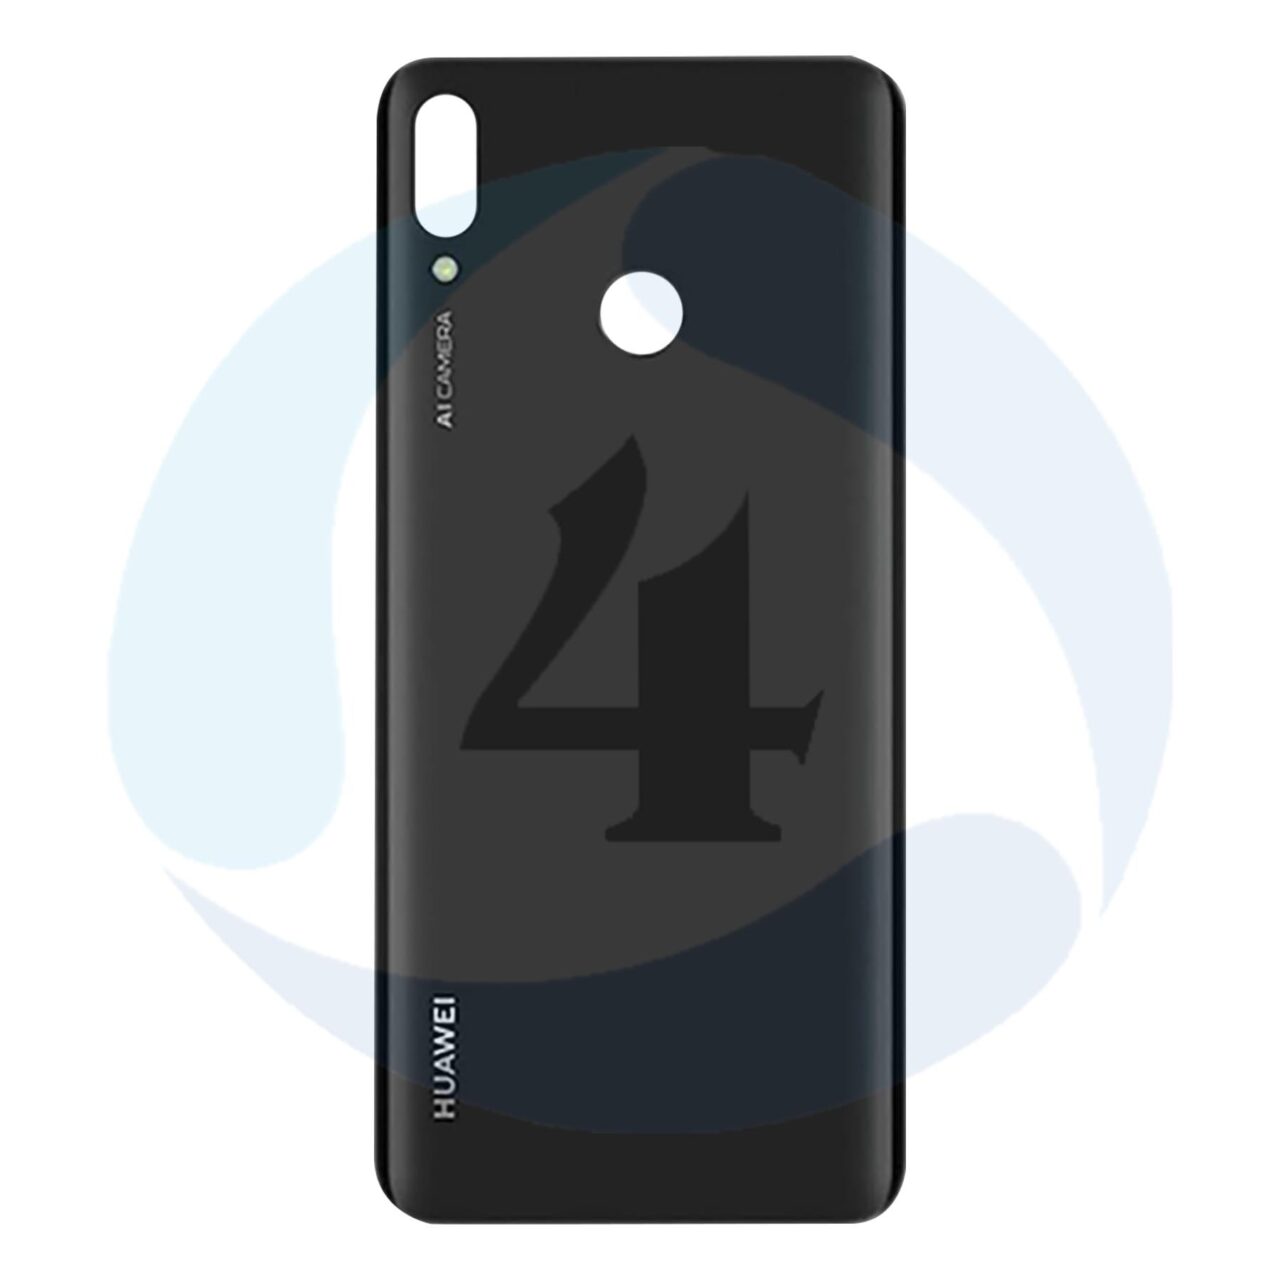 Backcover Black For Huawei Y9 2019